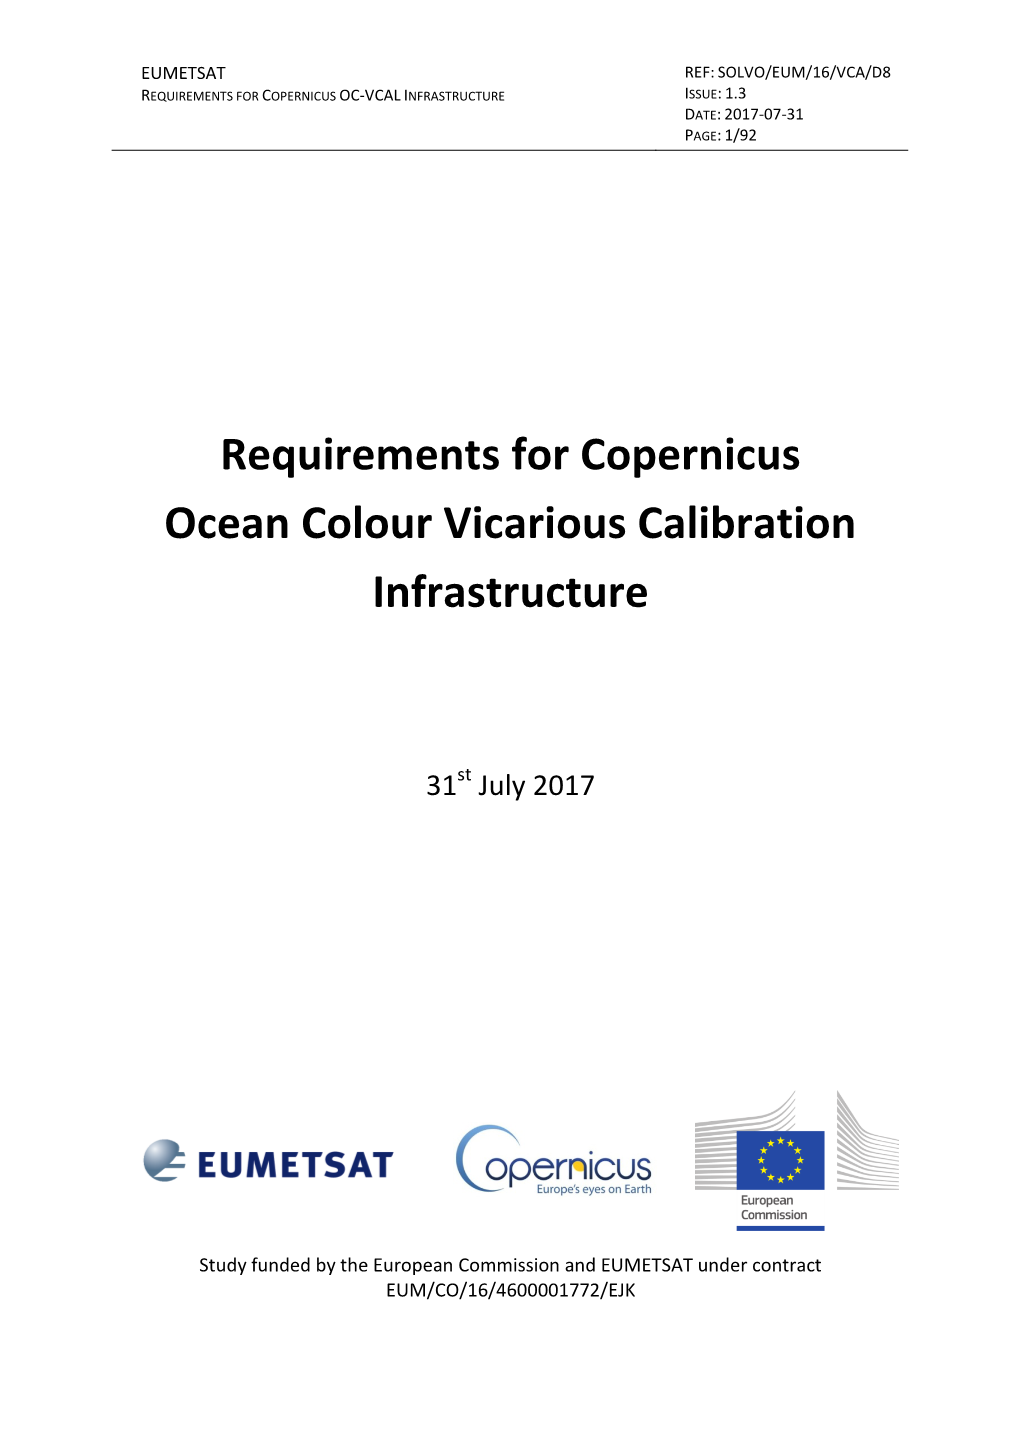 Requirements for Copernicus Ocean Colour Vicarious Calibration Infrastructure